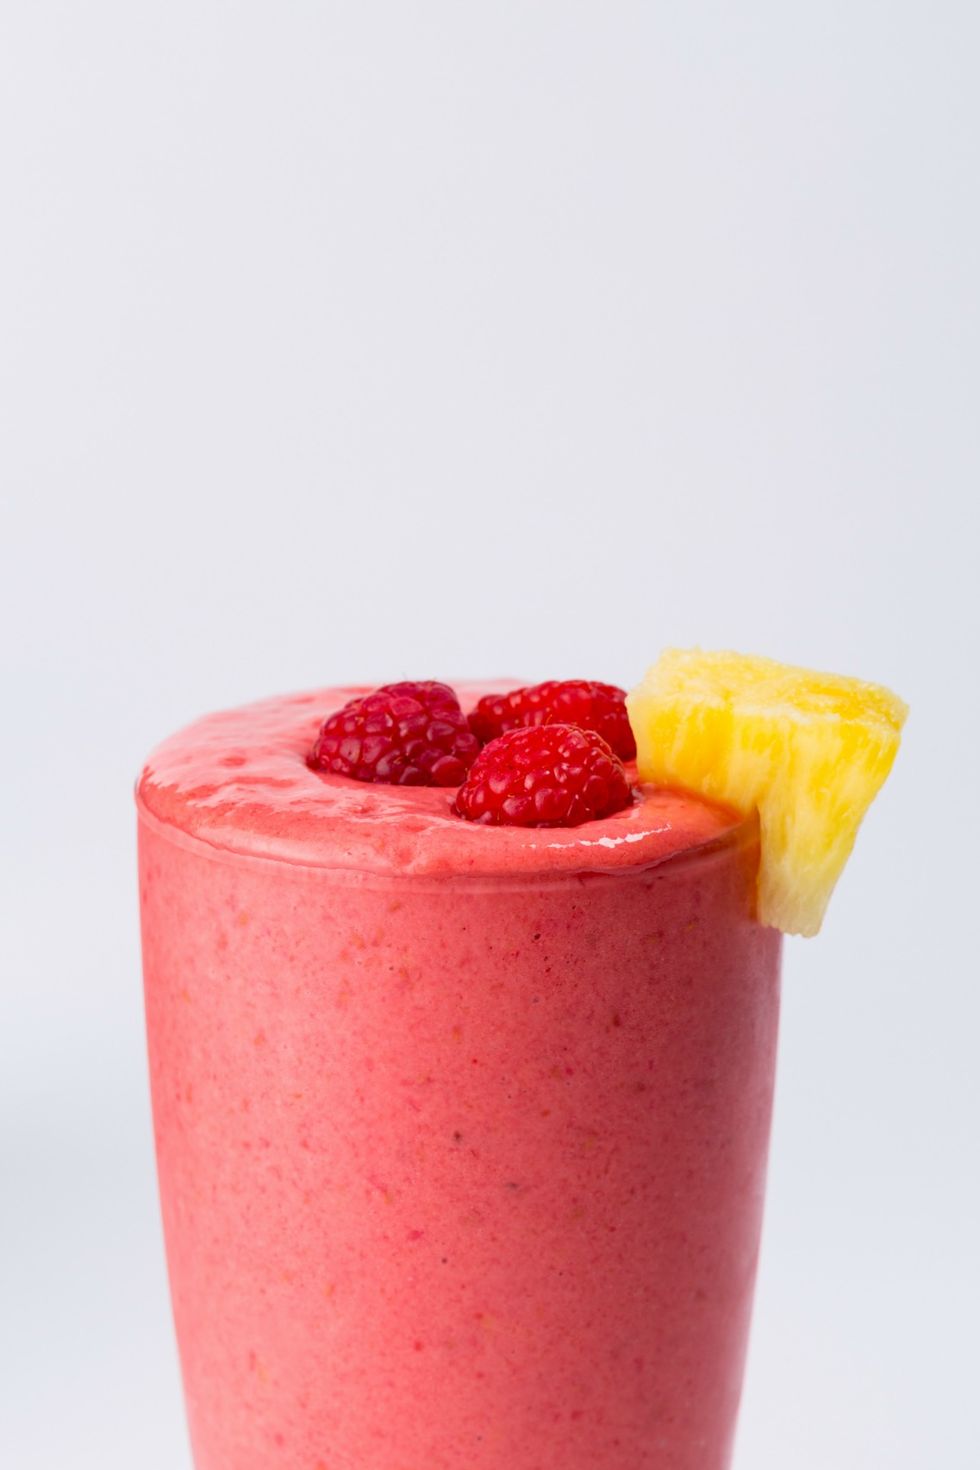 what can i put in a healthy smoothie